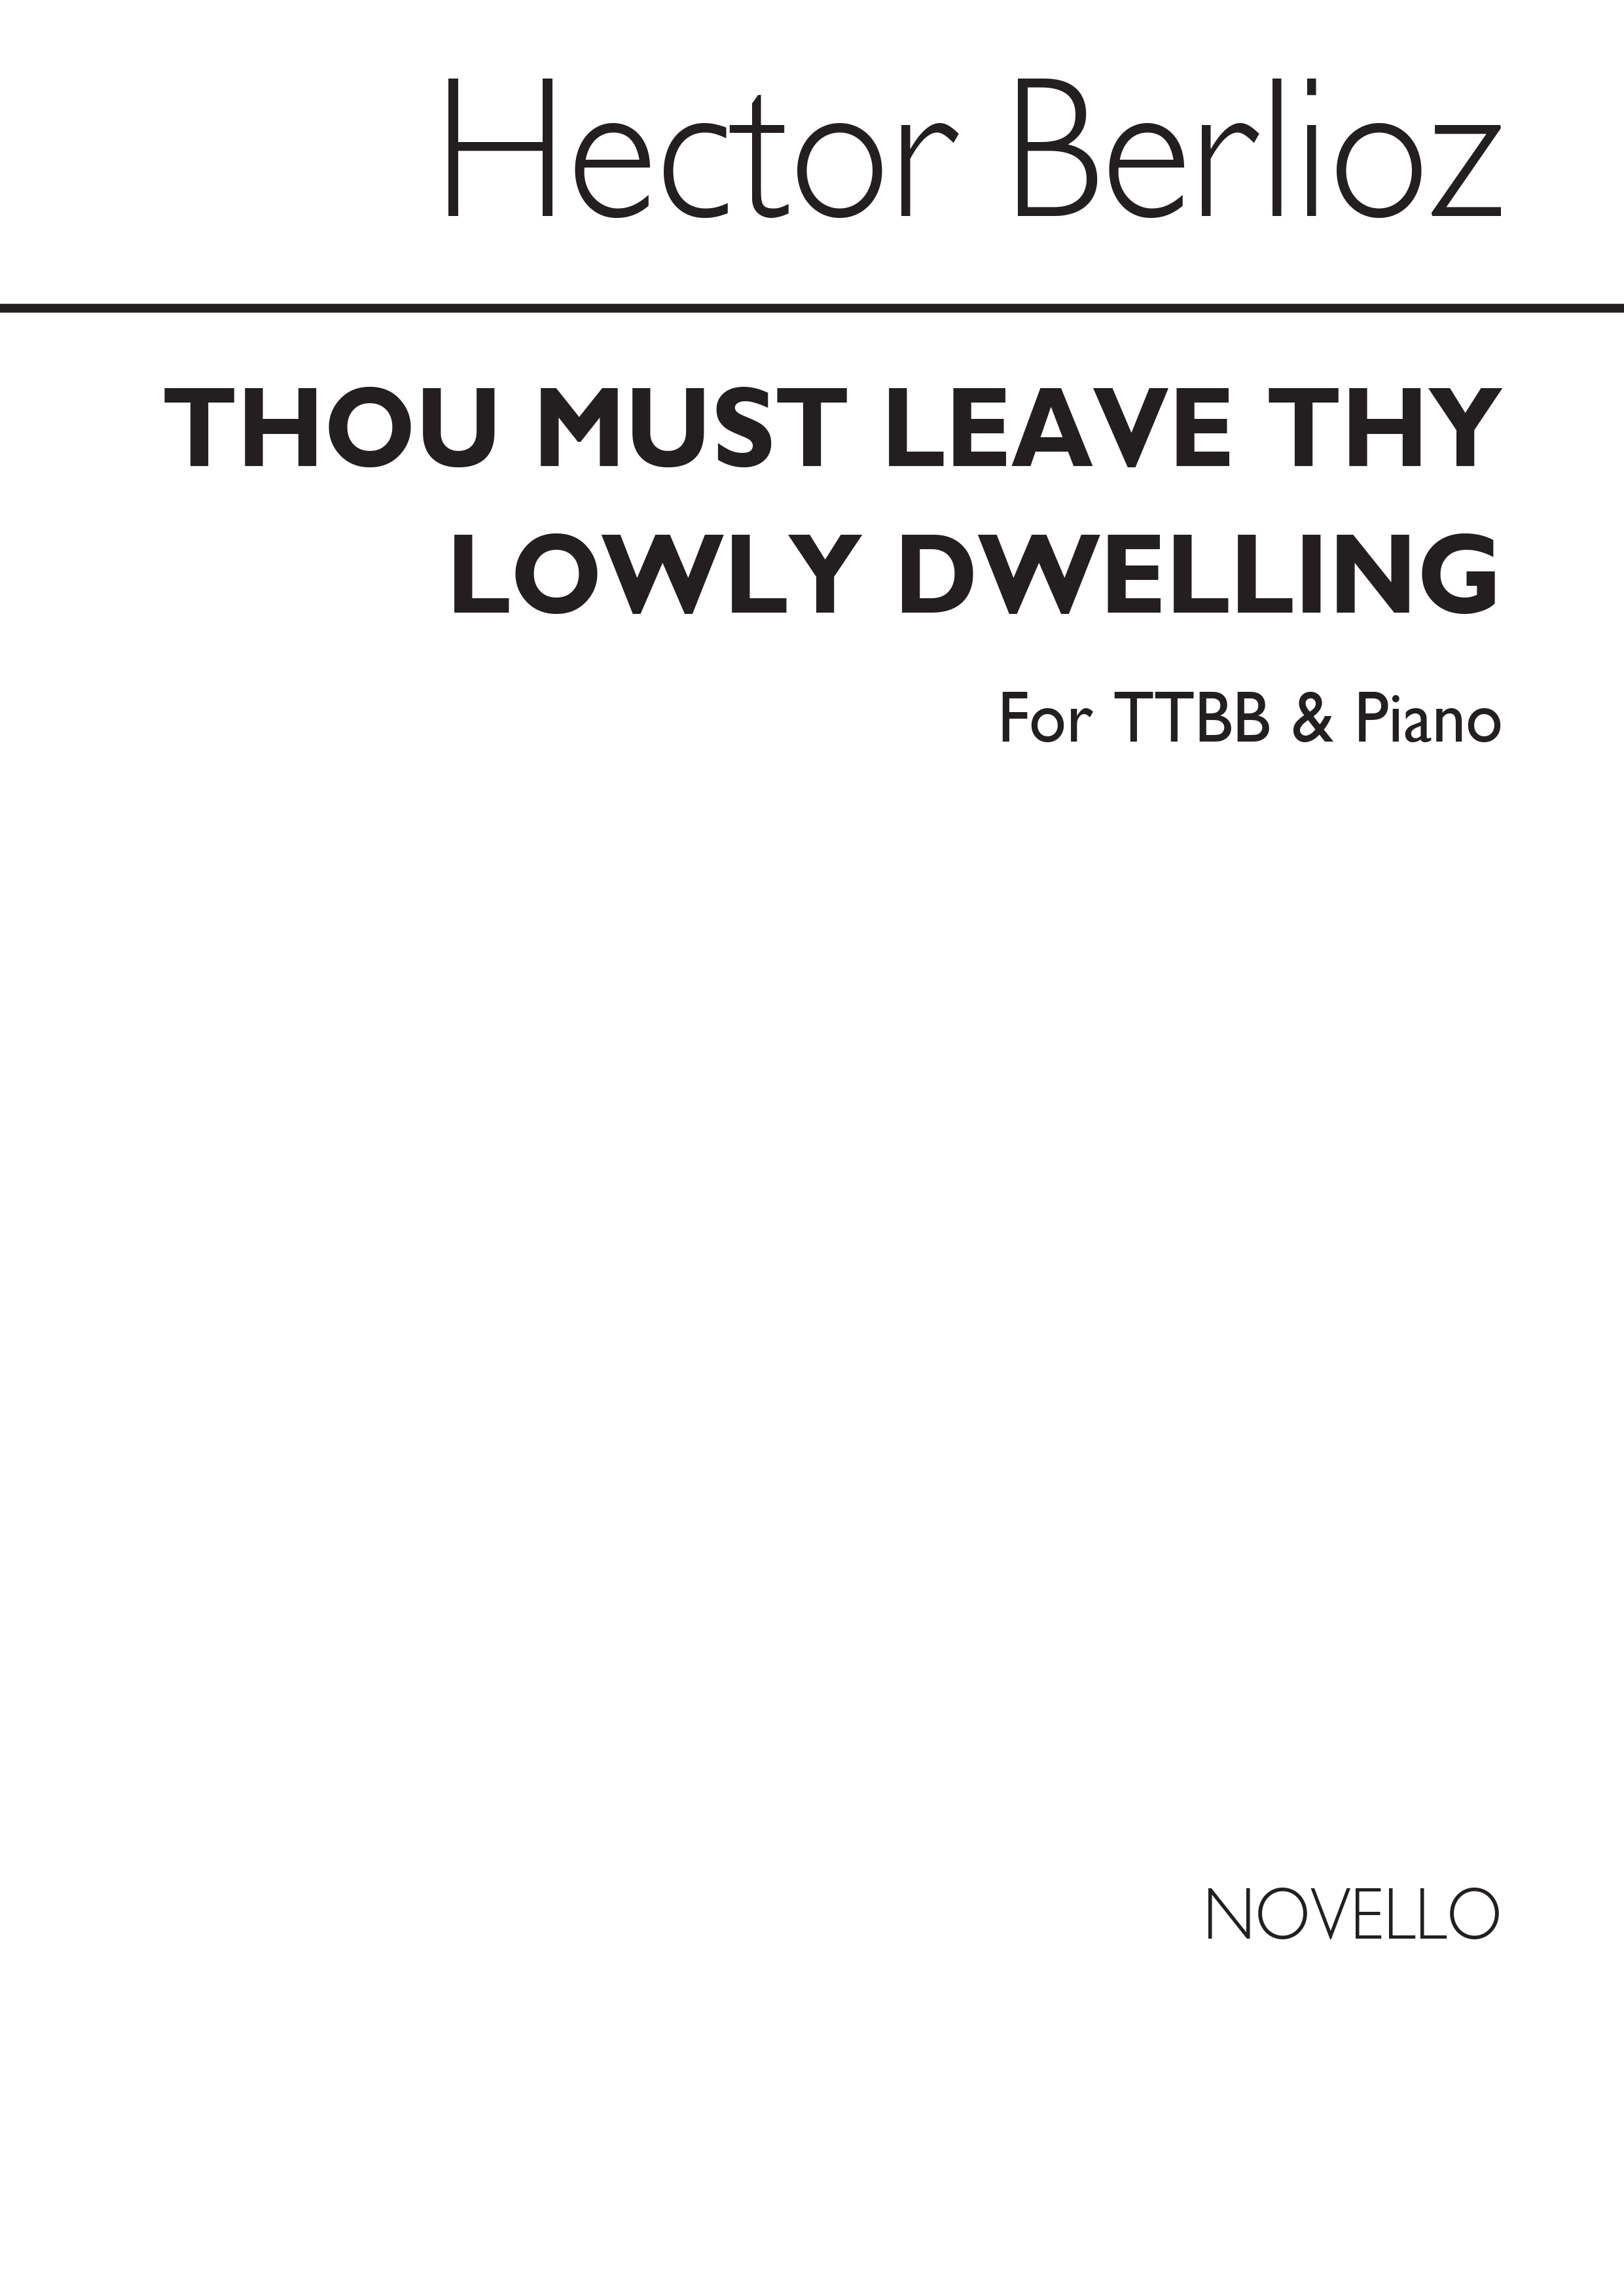 Hector Berlioz: Thou Must Leave Thy Lowly Dwelling Ttbb/Piano